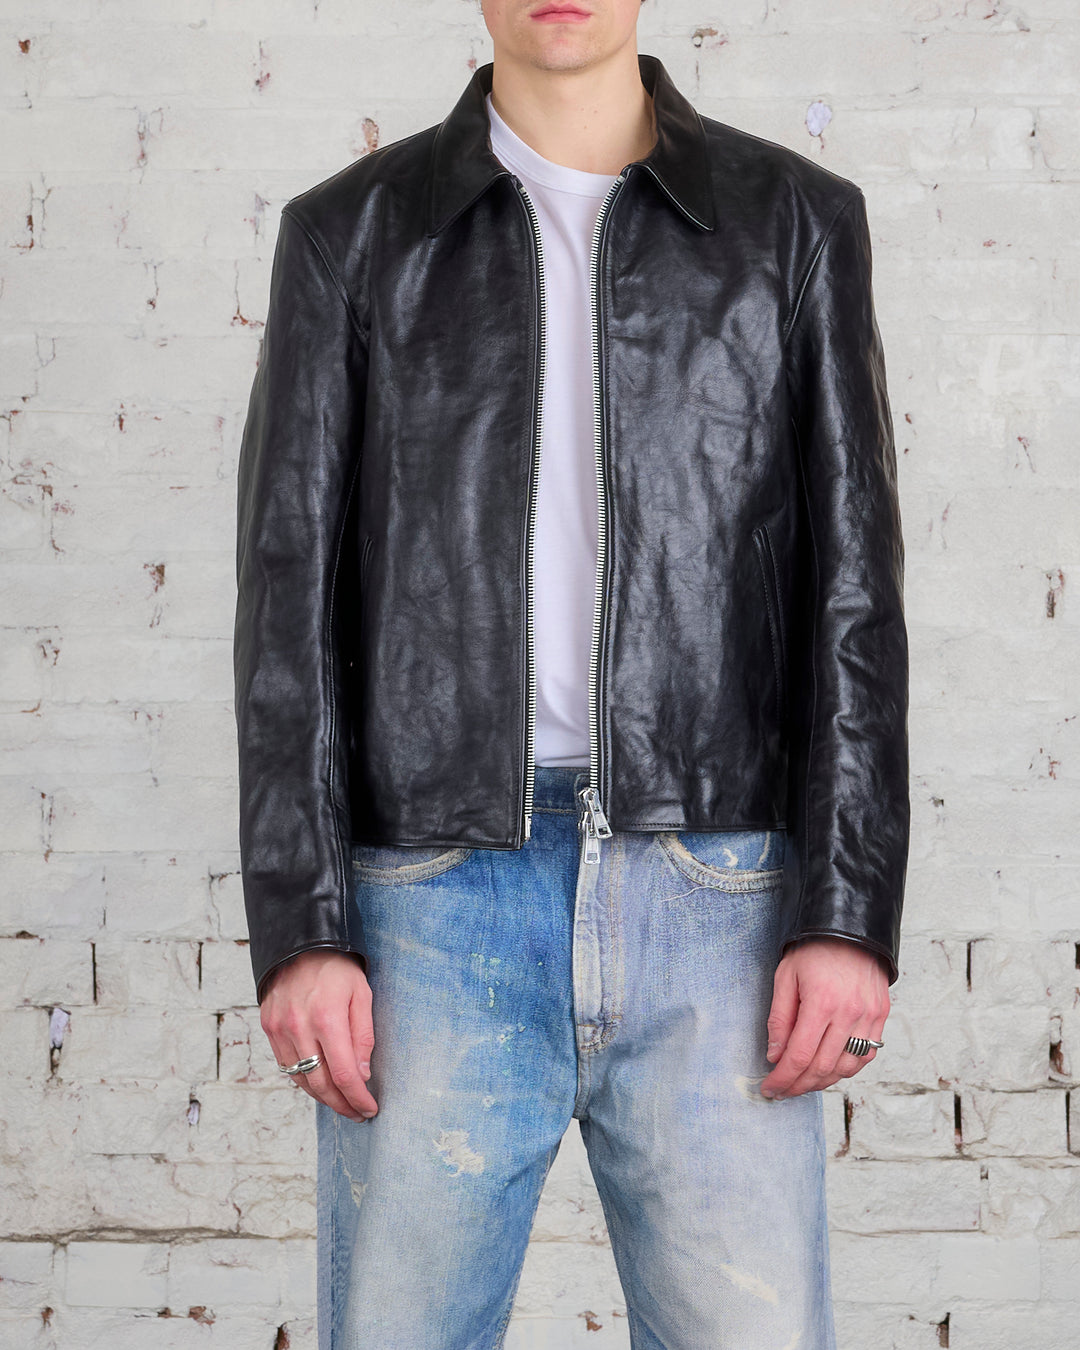 Our Legacy Mini Jacket Top Dyed Black Leather